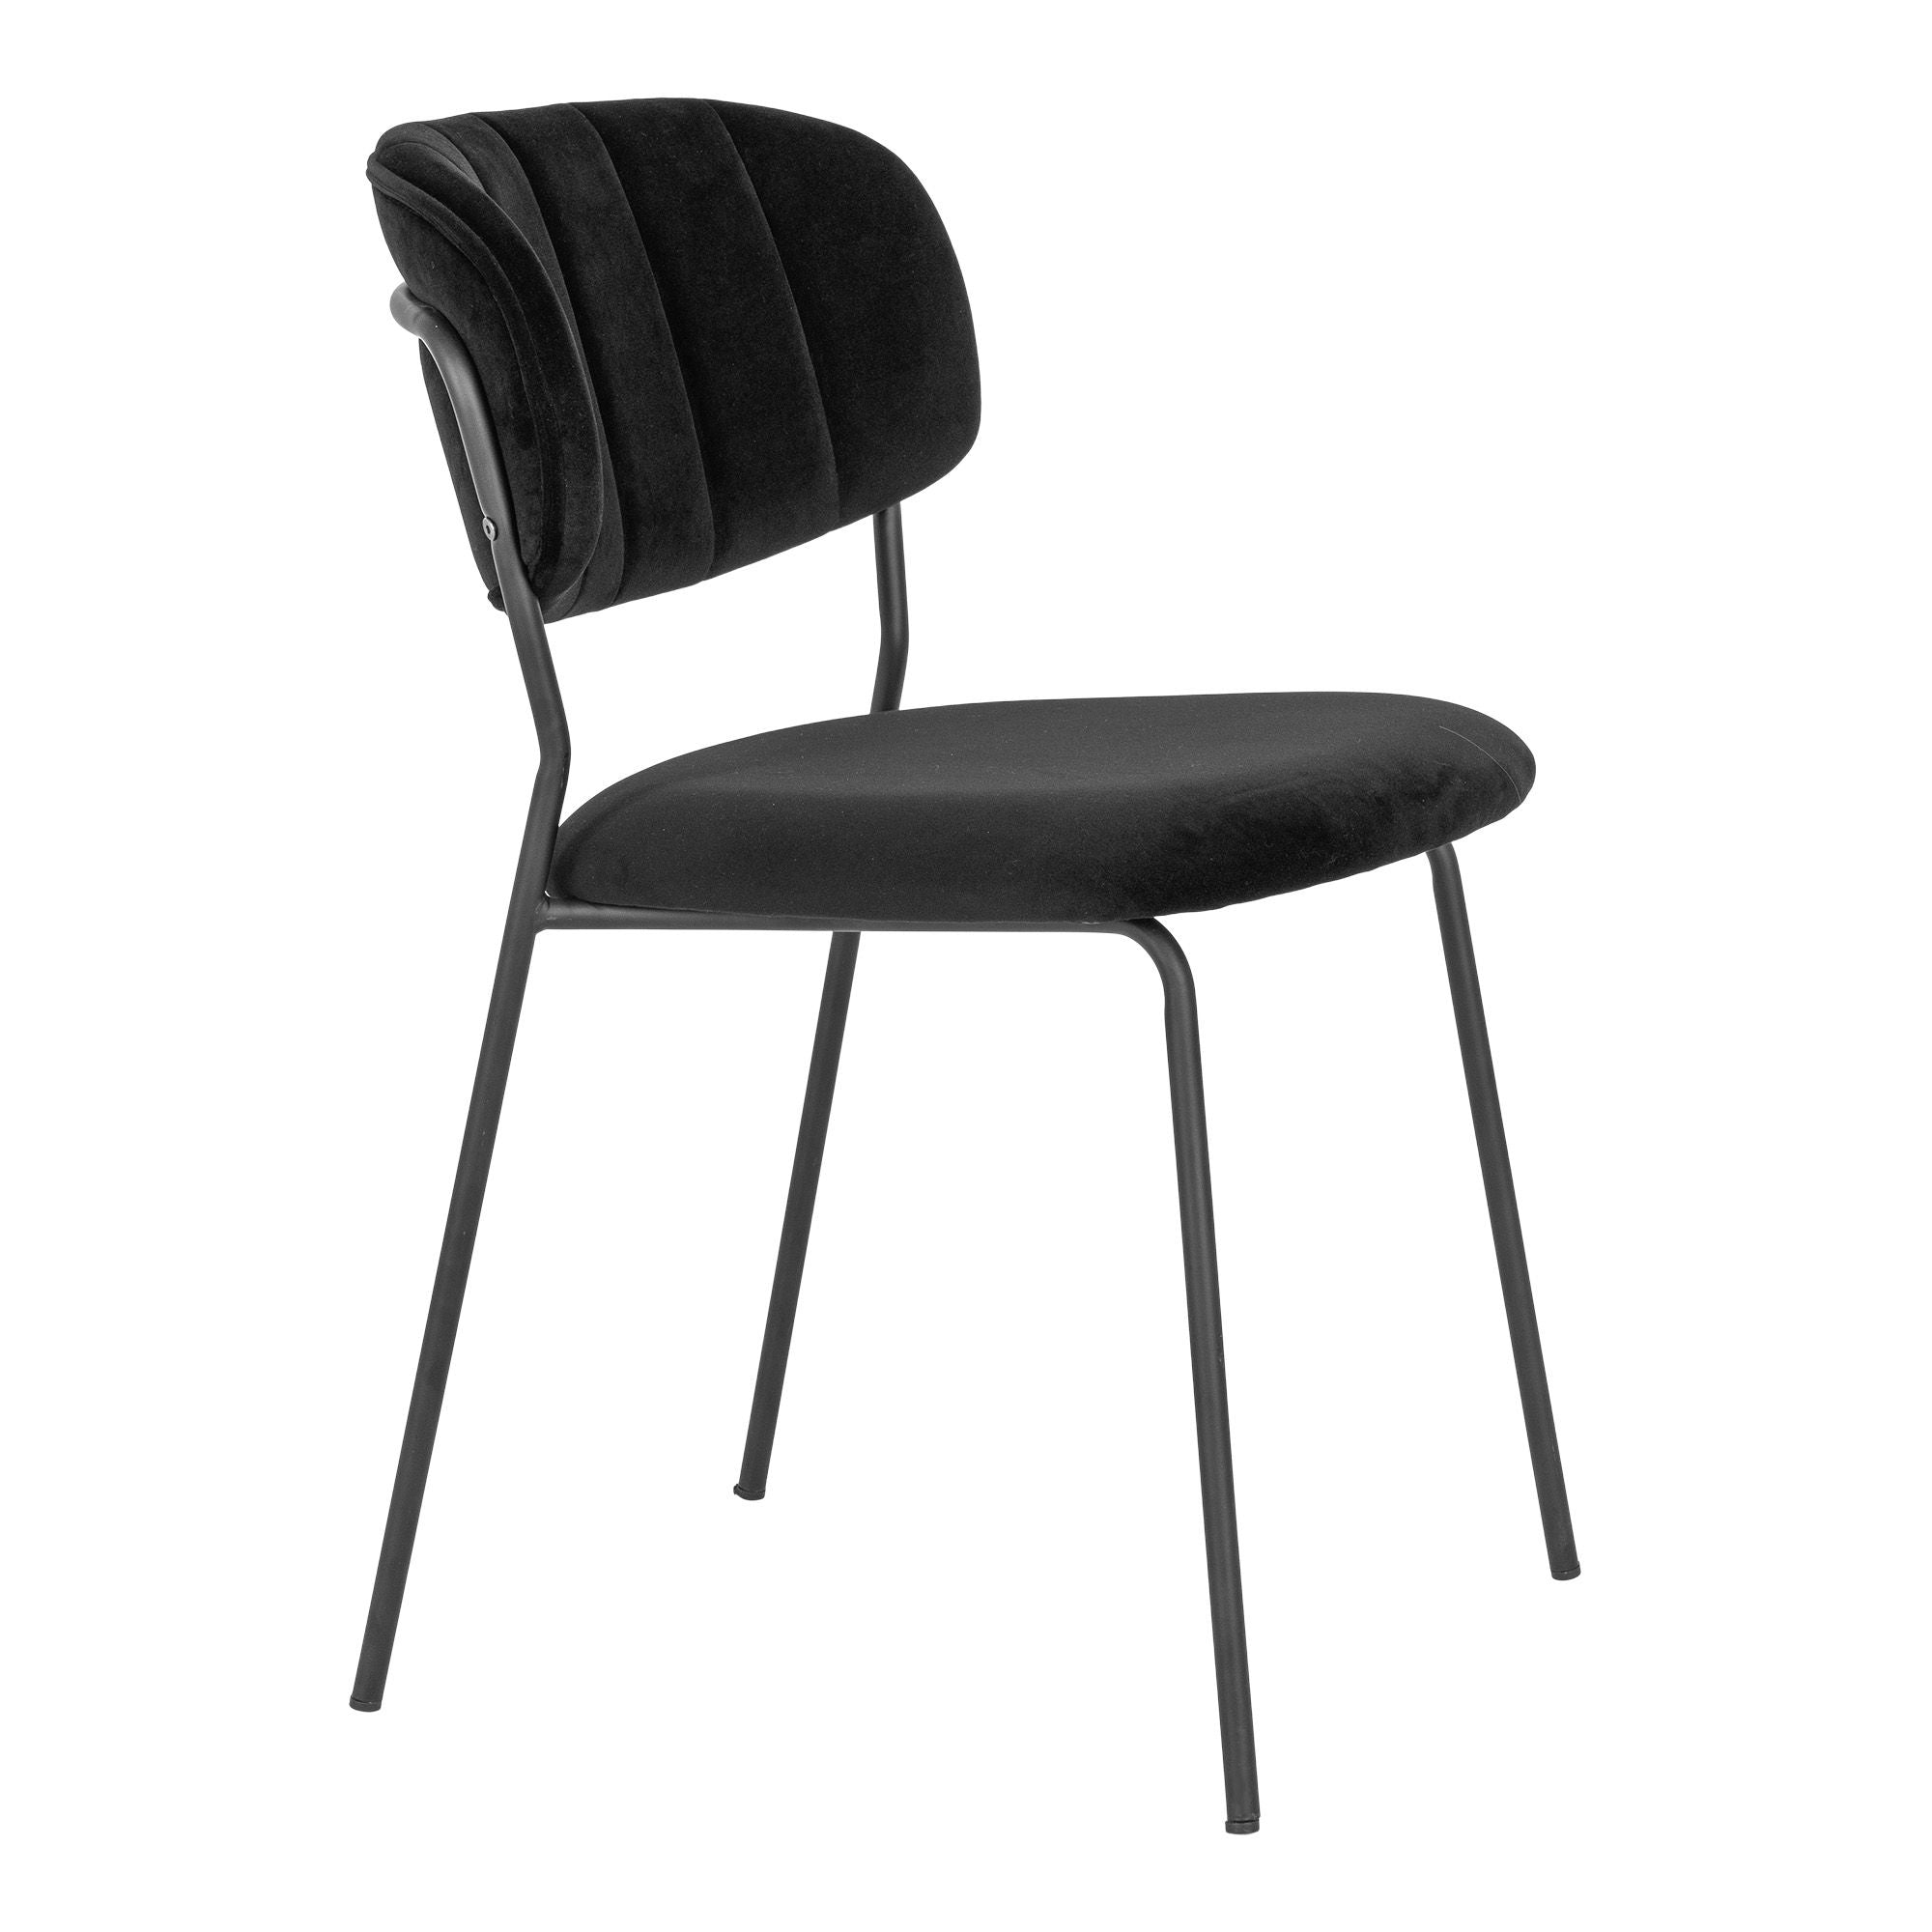 House Nordic - Alicante Dining Table Chair